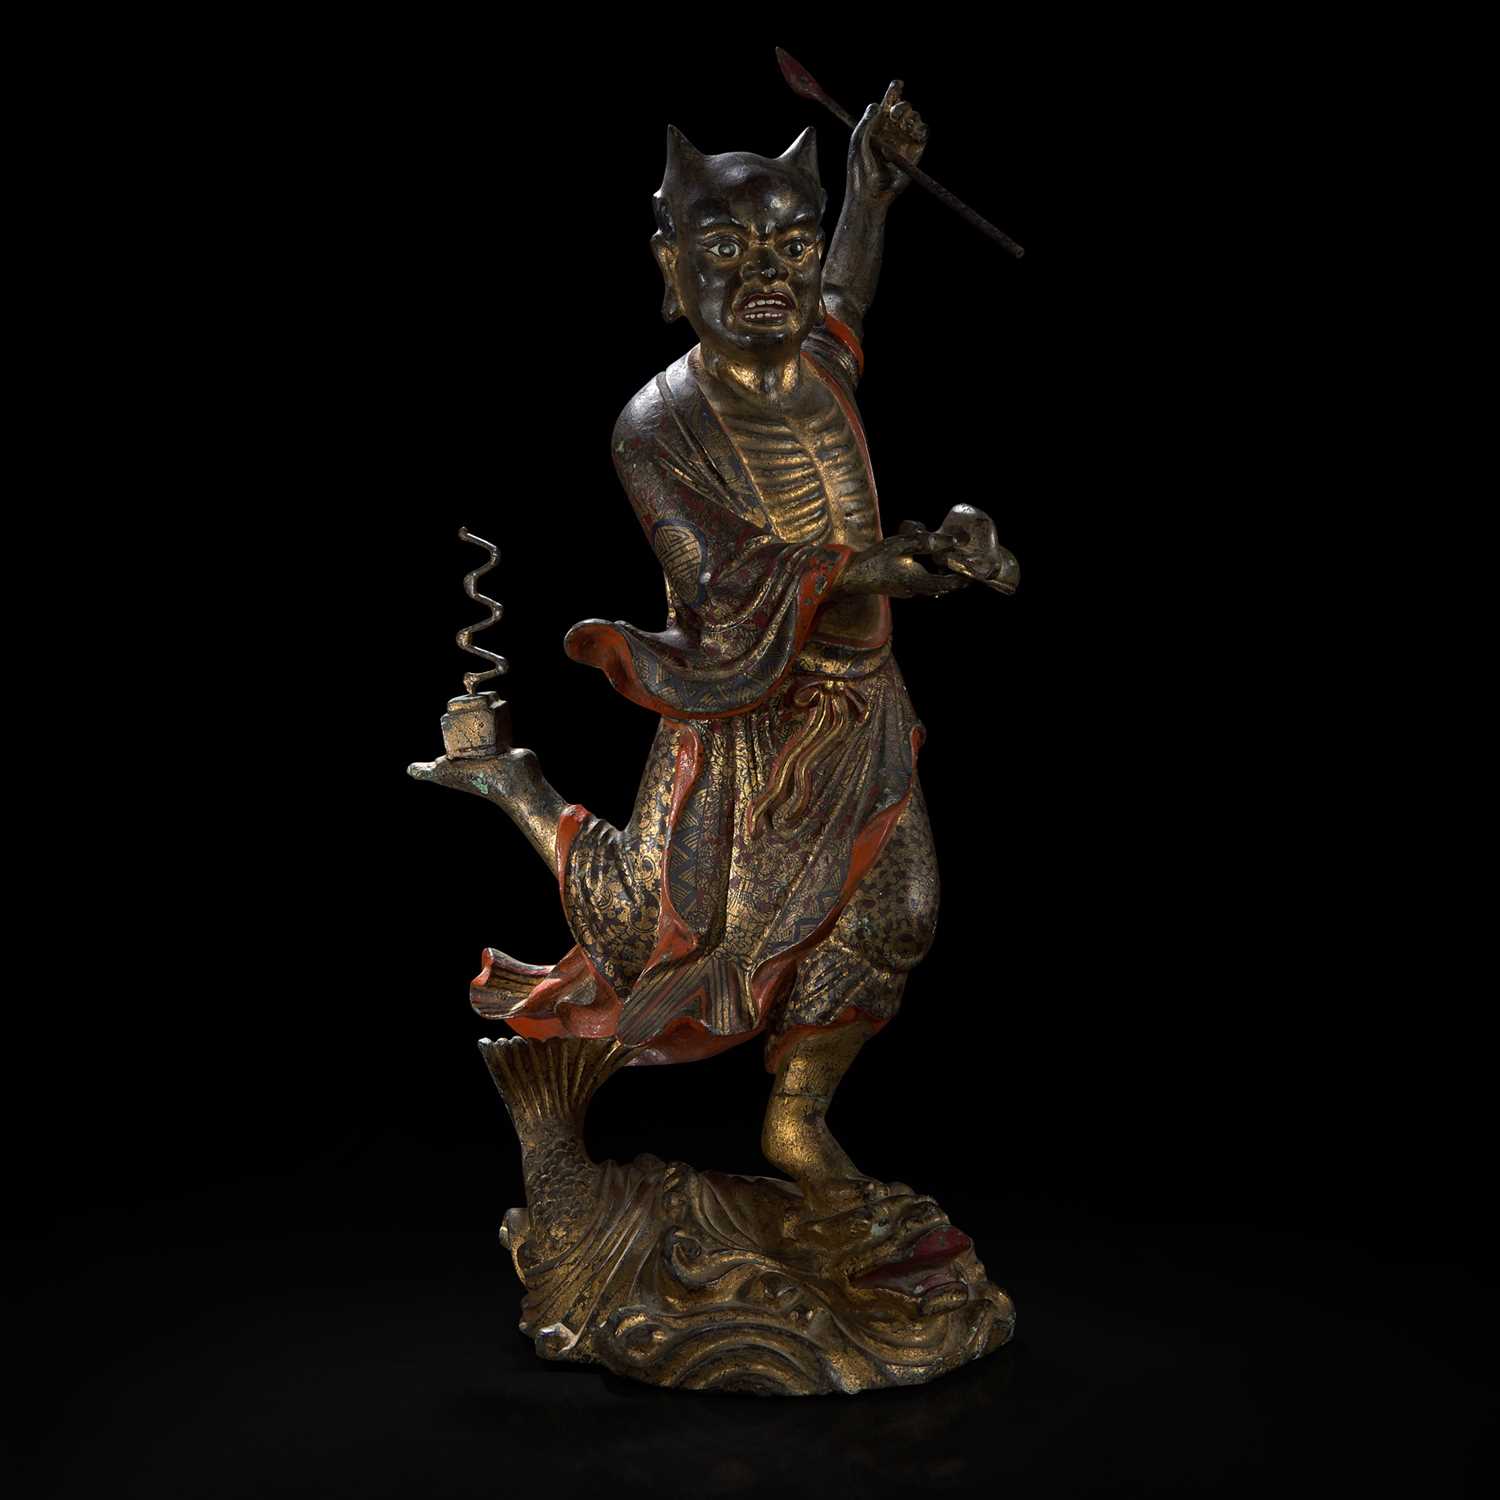 Lot 46 - A large Chinese gilt and lacquered bronze figure of "Kui Xing" 铜鎏金魁星